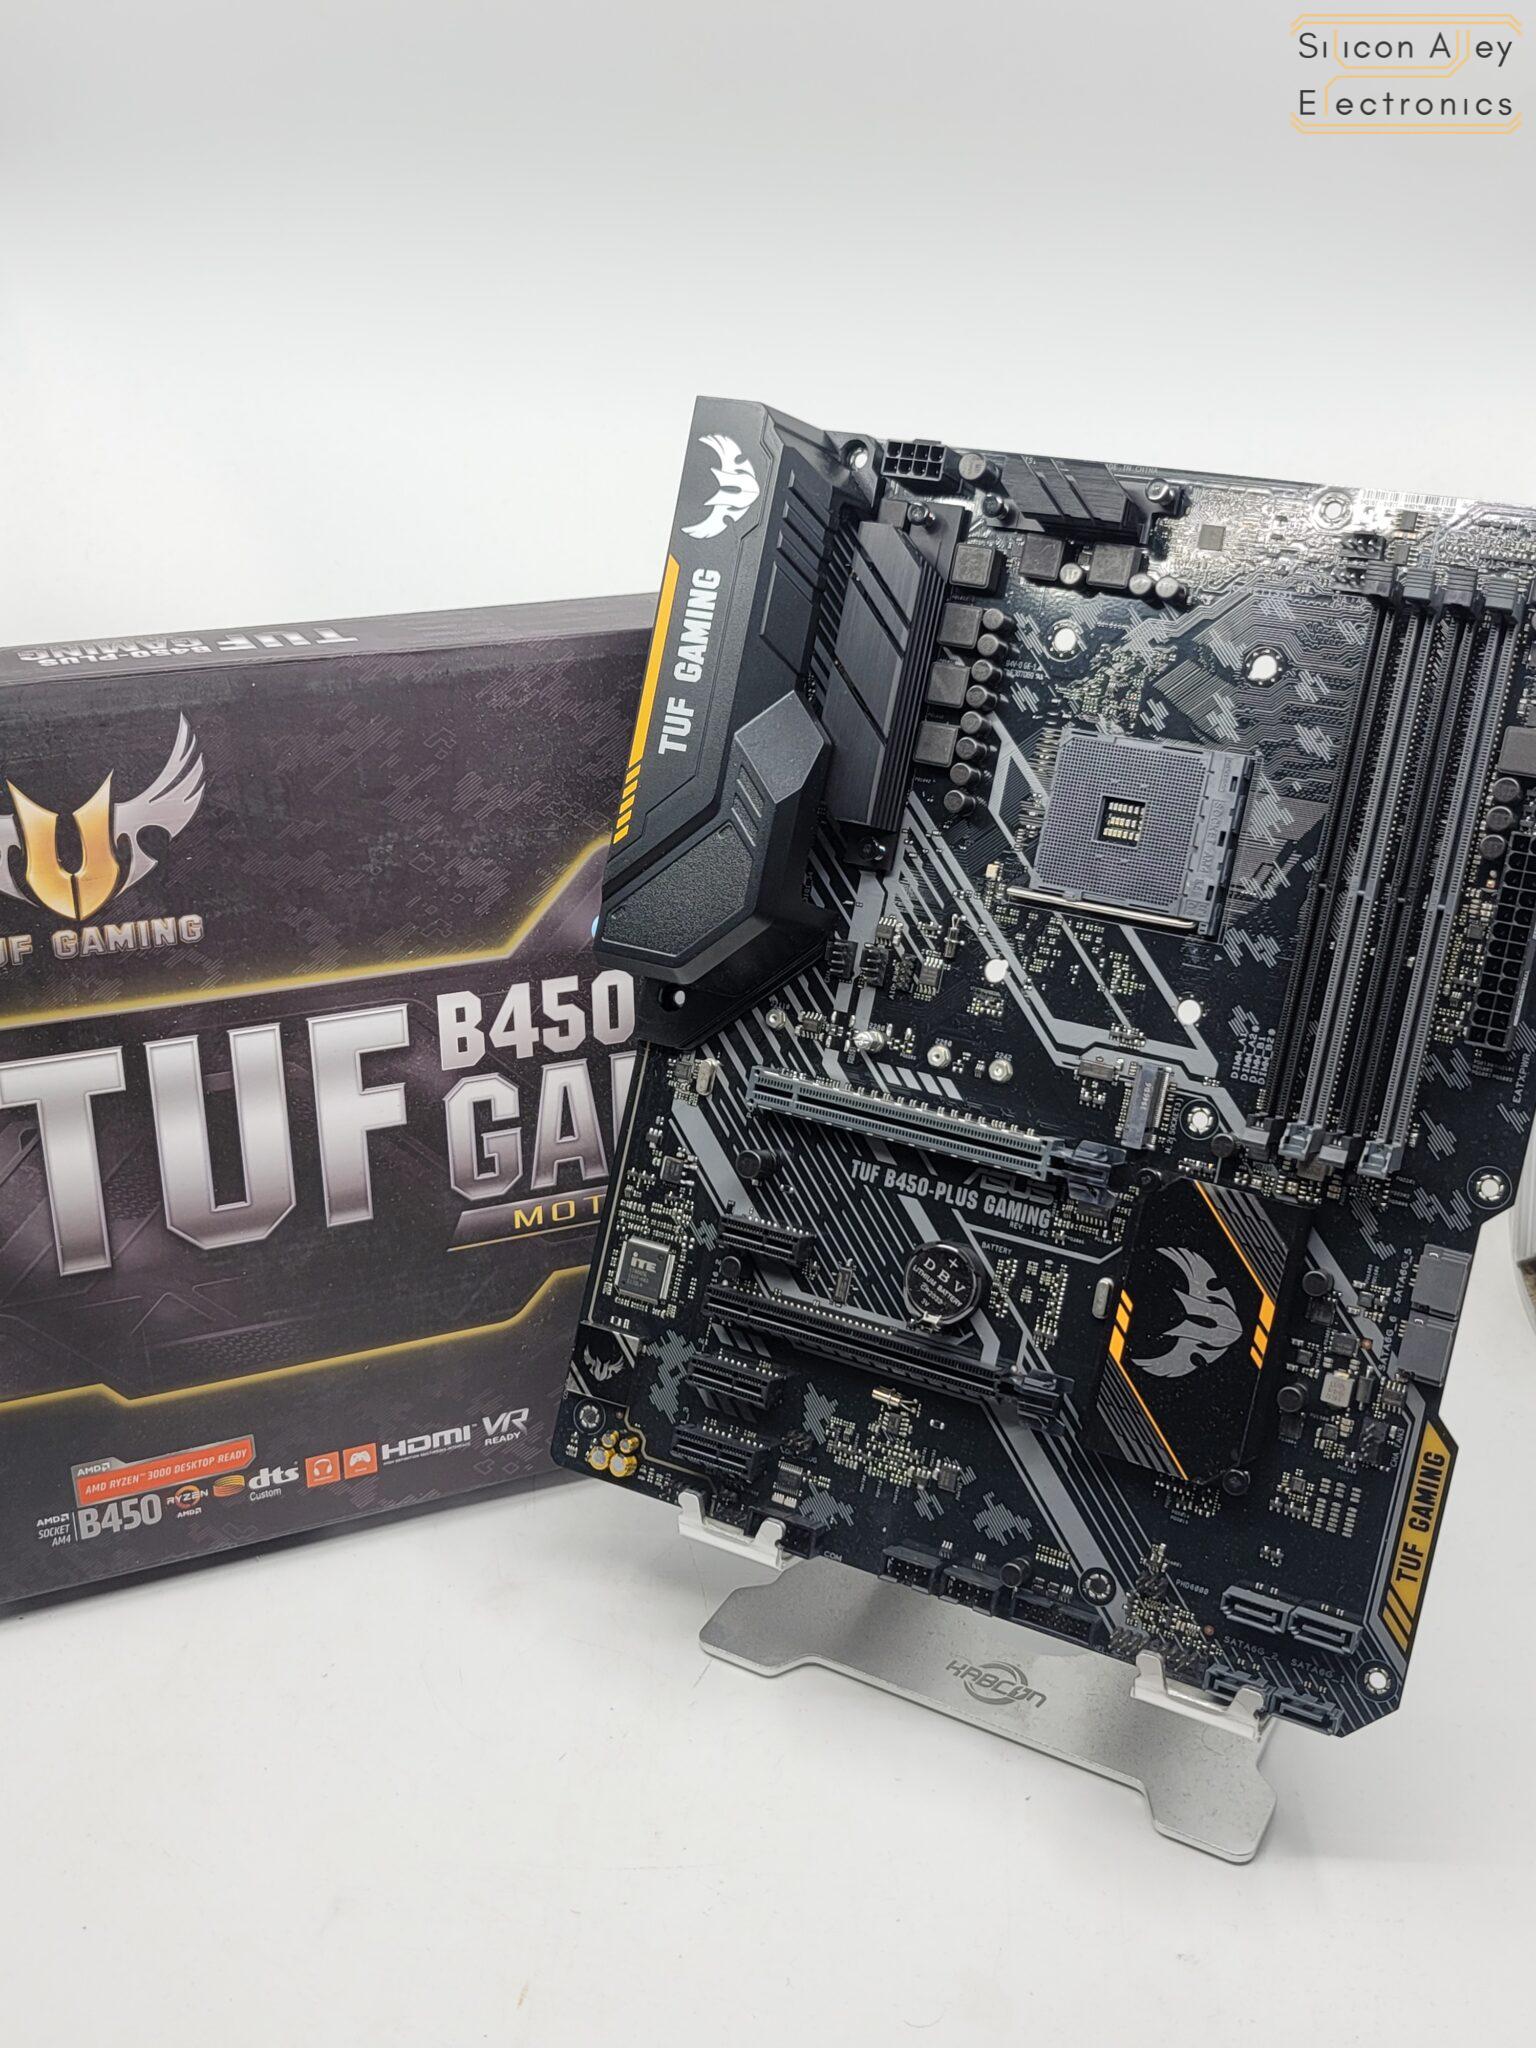 ASUS TUF B450-Plus Gaming AMD AM4 ATX Motherboard - Silicon Alley